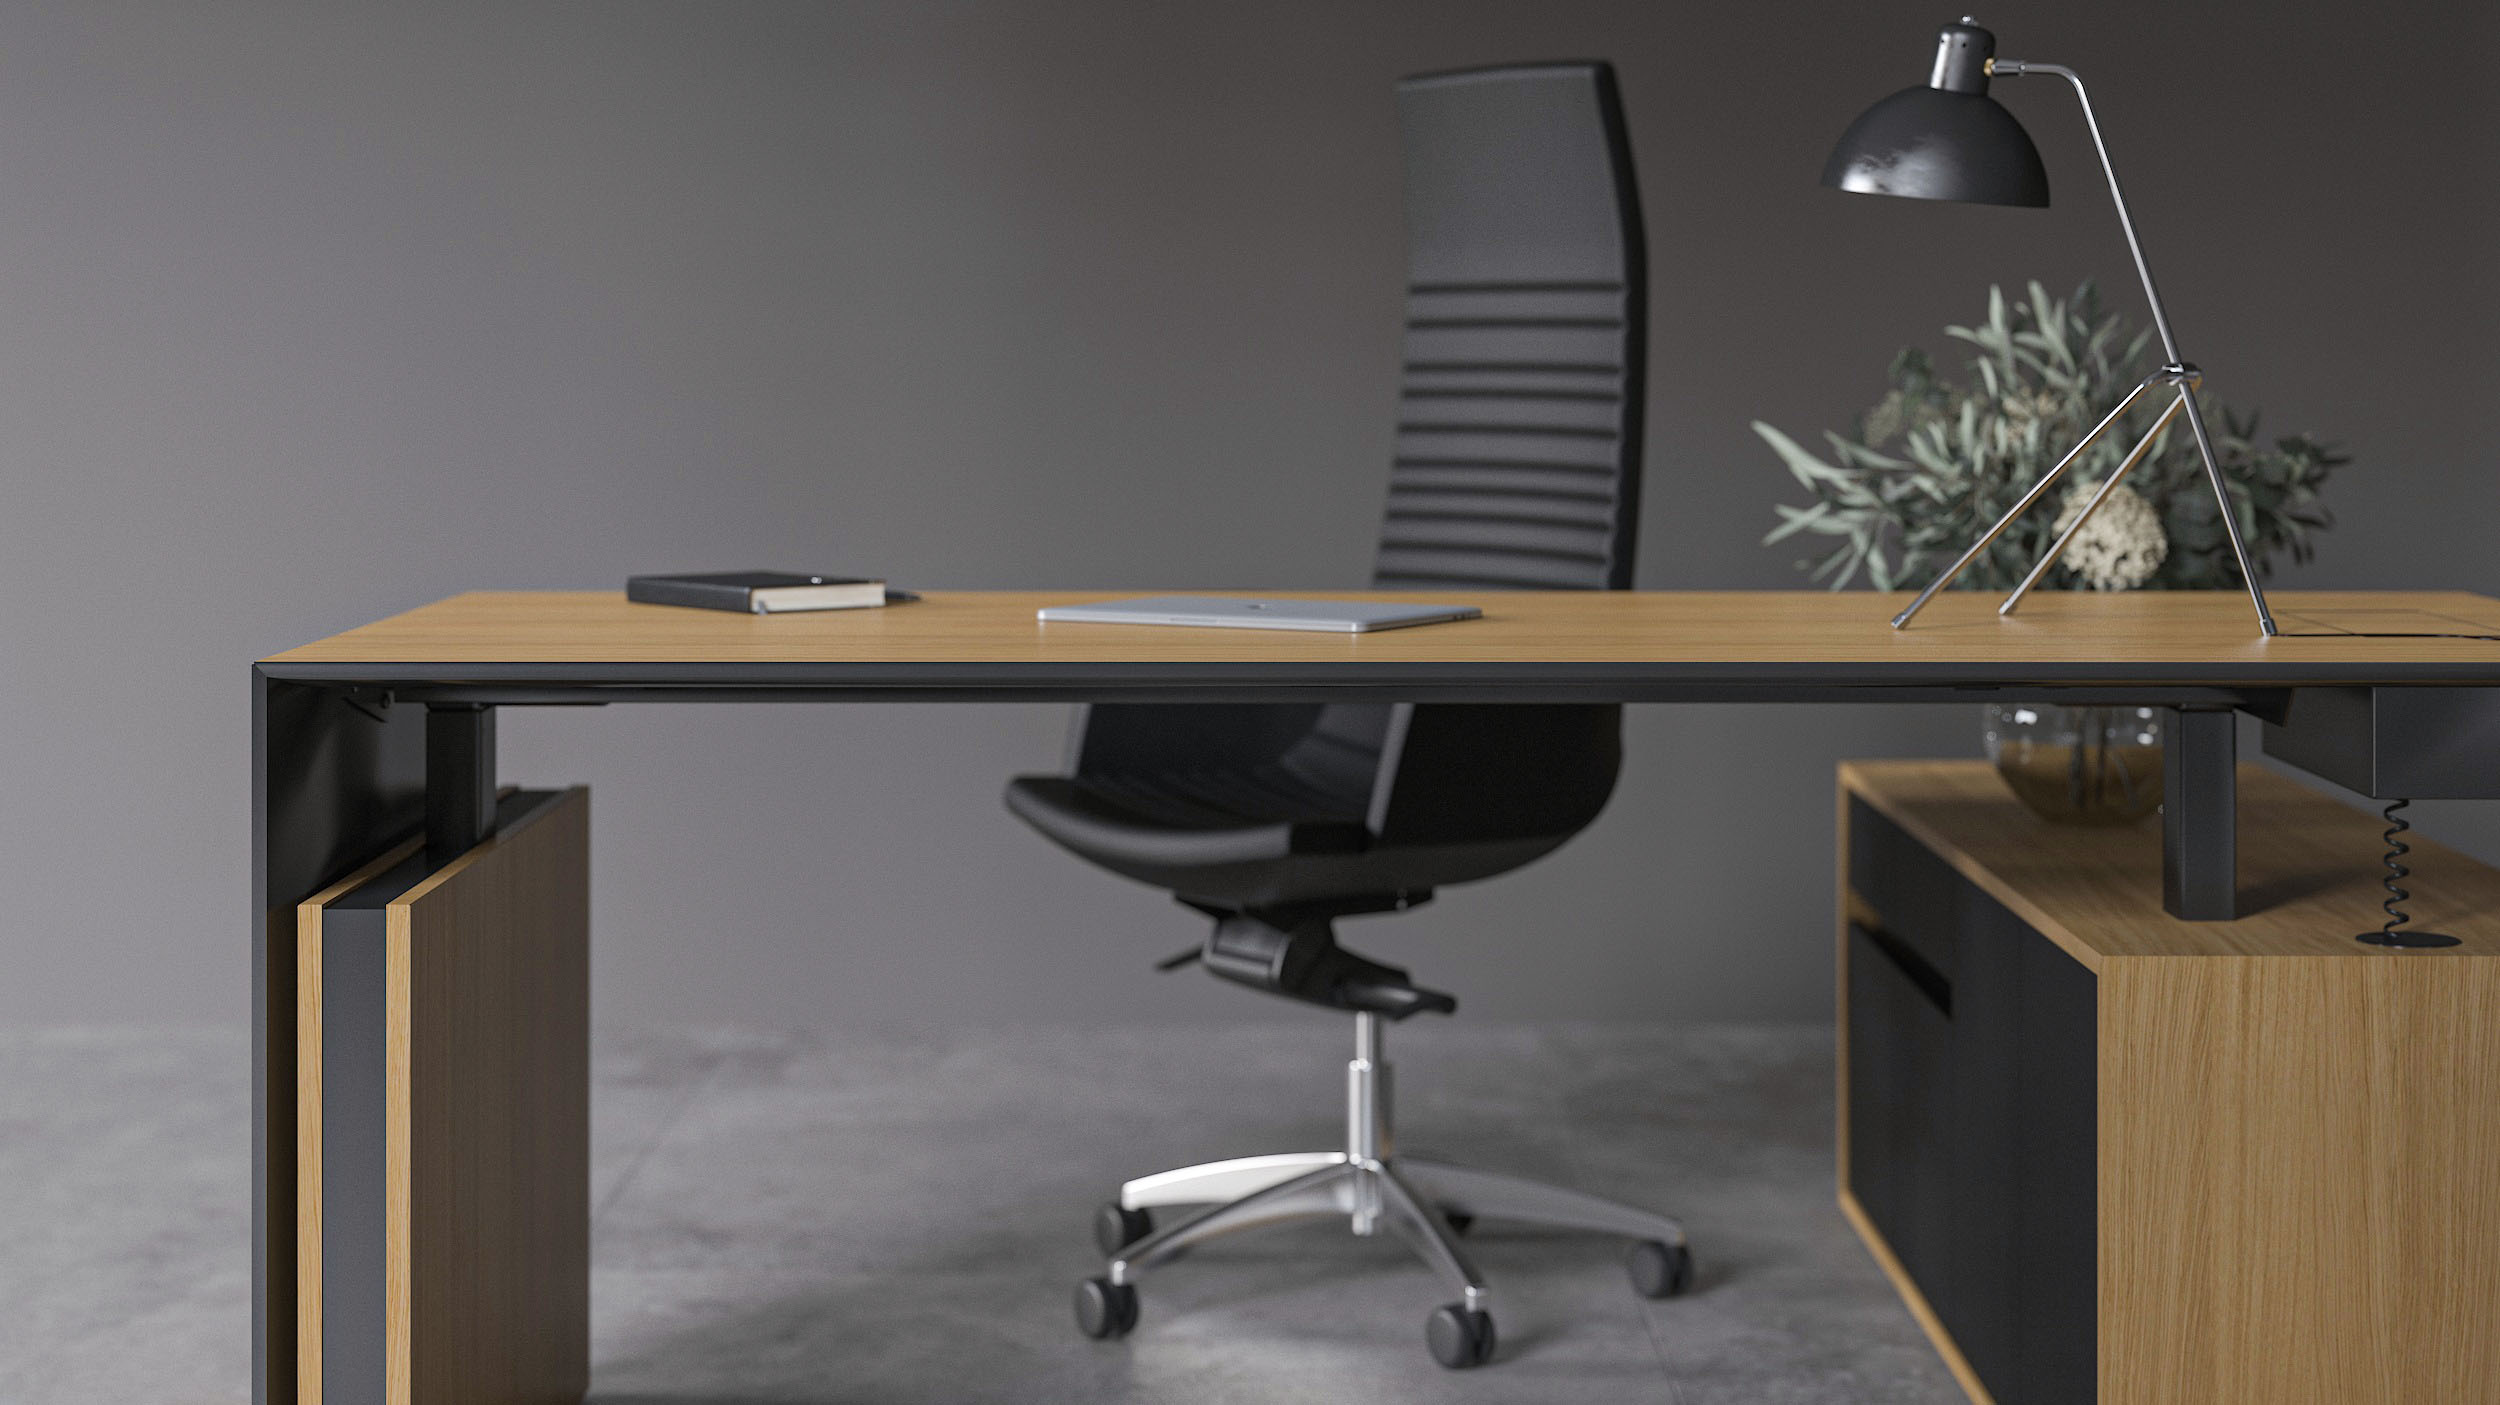 Height adjustable legs and frame are hidden by the sleek panel end